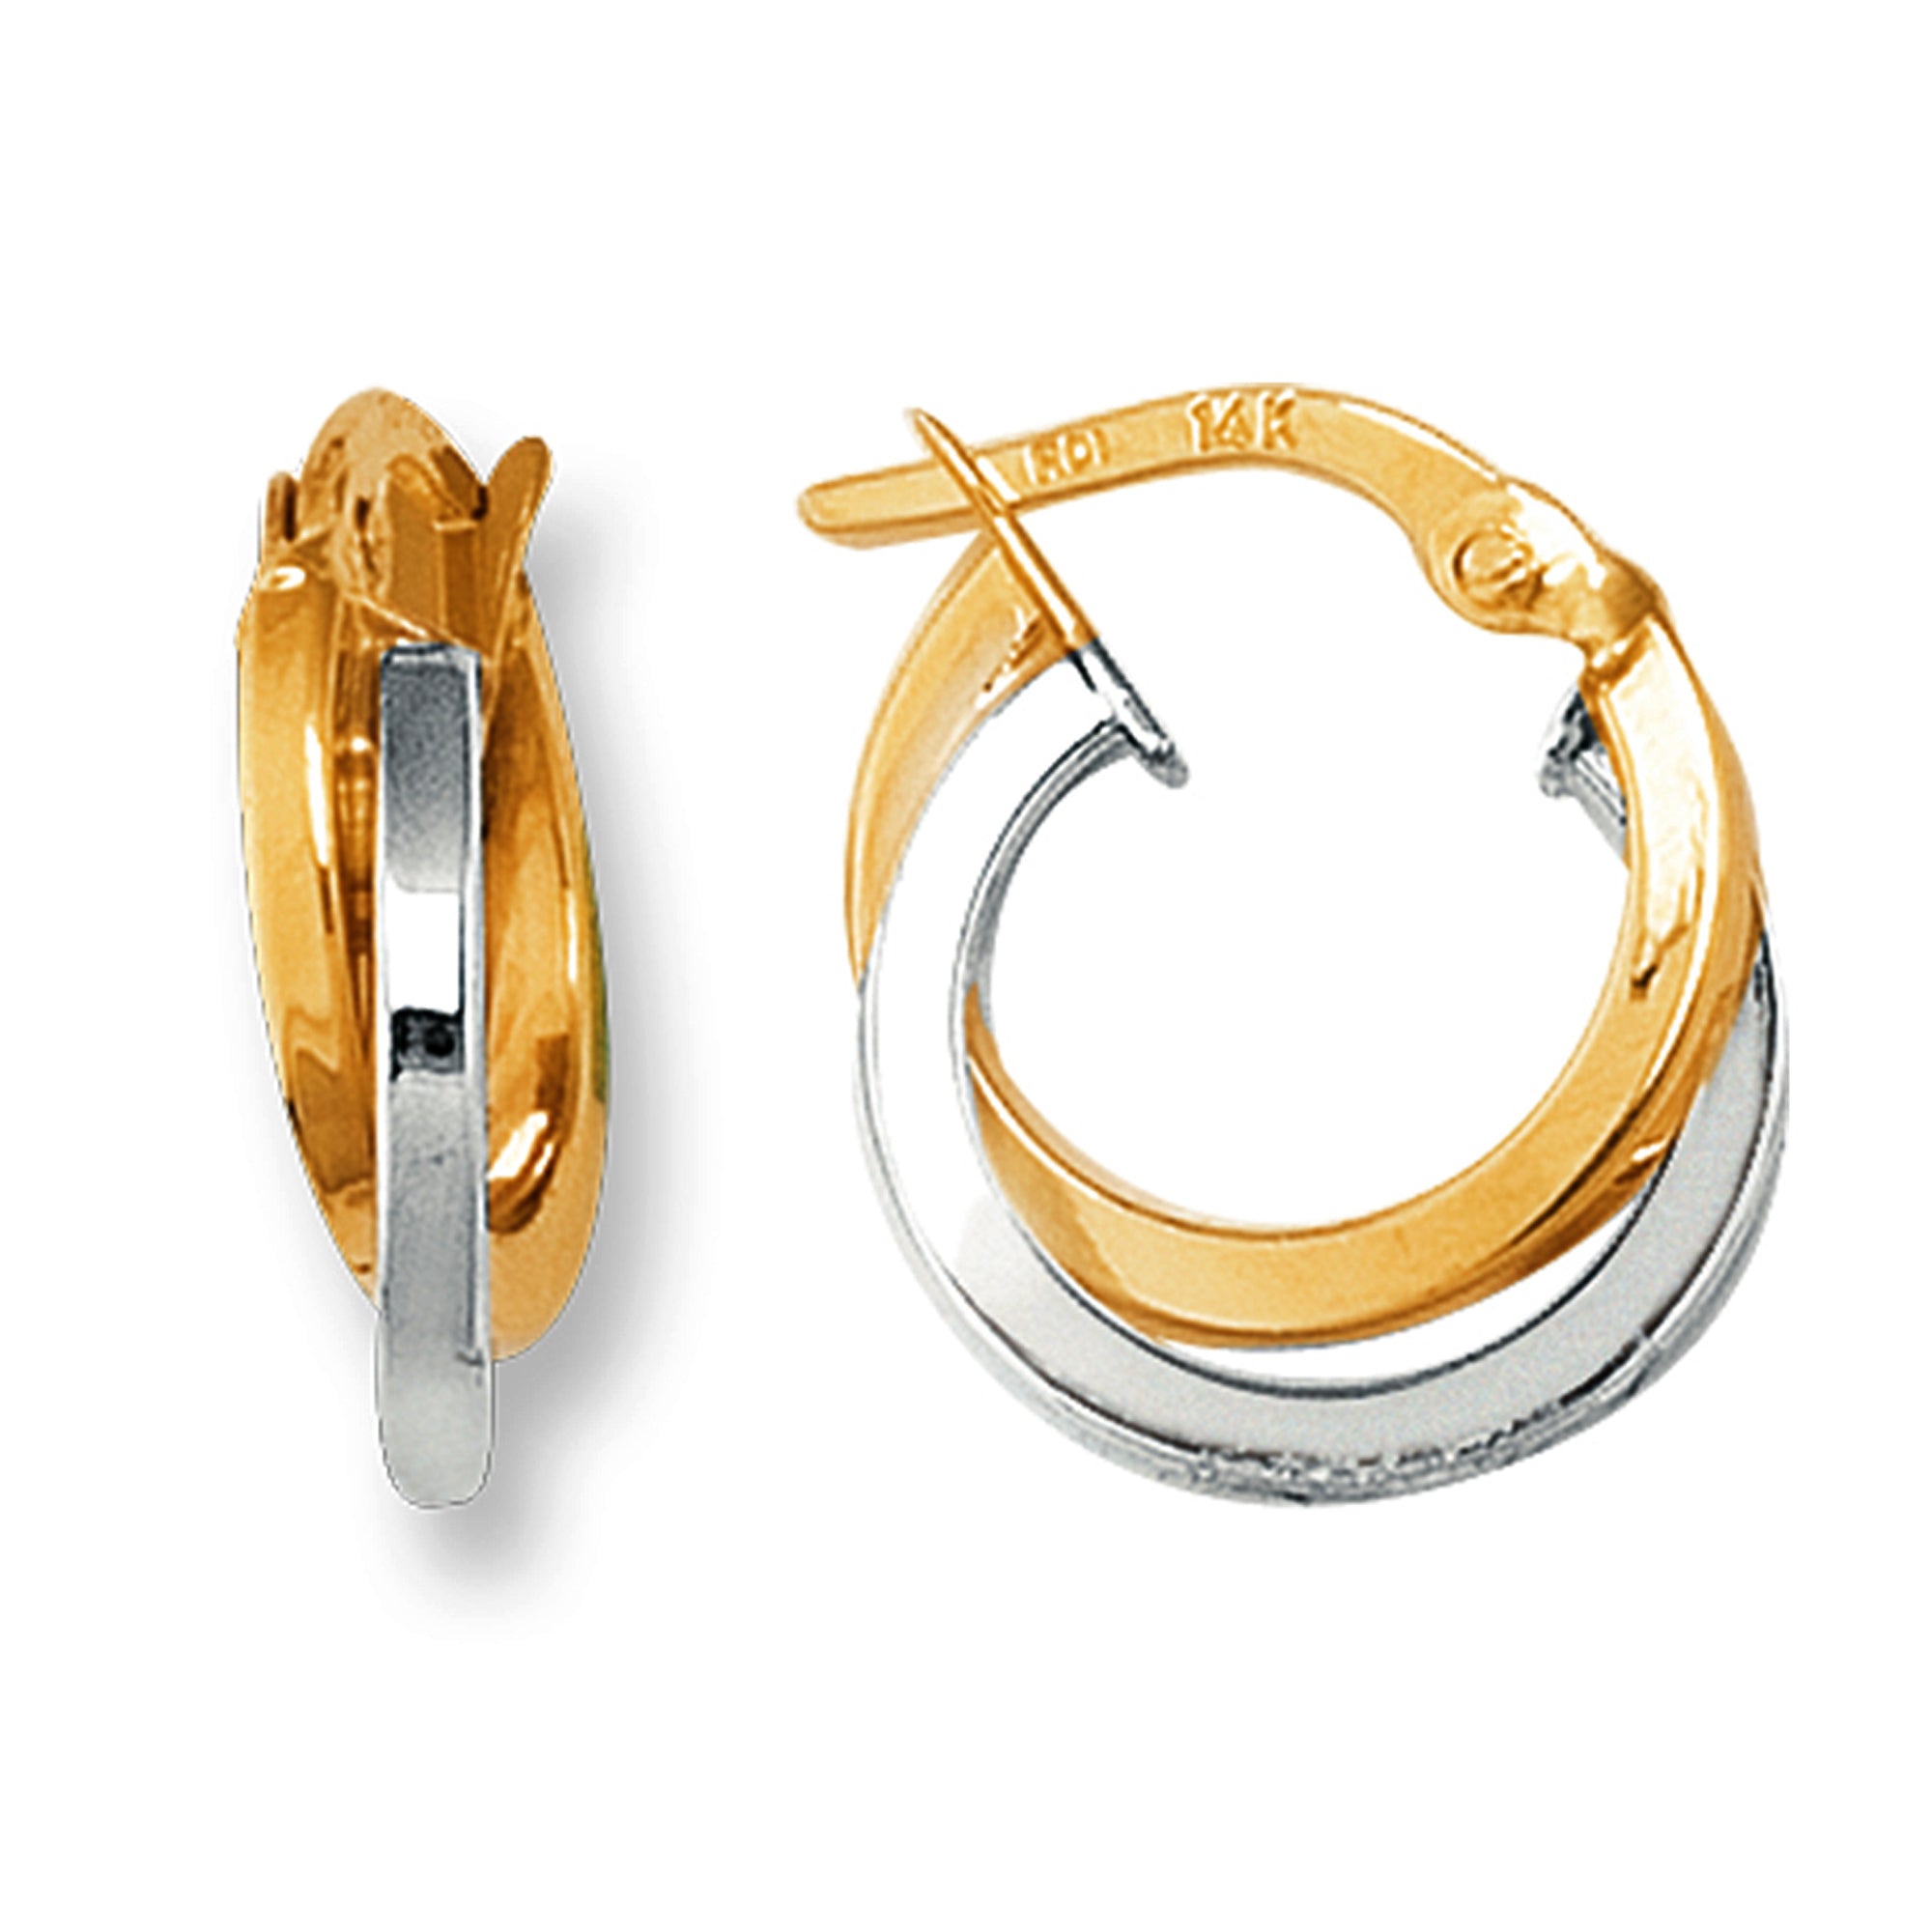 14K Yellow And White Gold Two Tone Double Row Hoop Earrings, Diameter 12mm